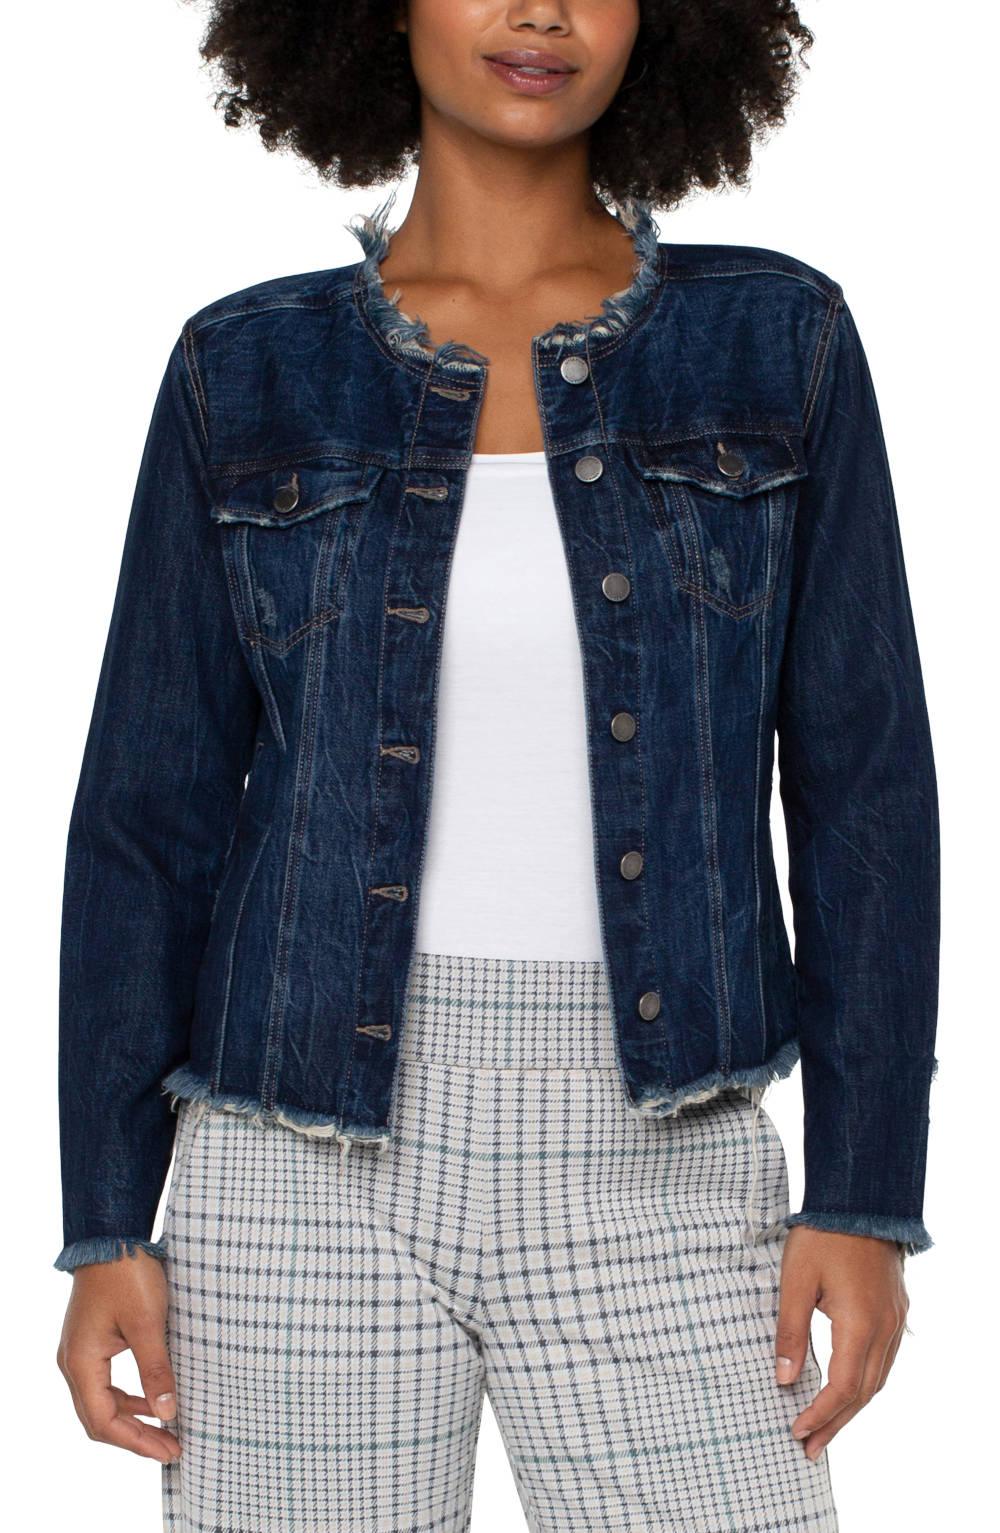 Liverpool Lace Up Denim Jacket - Strawberry Moon Boutique